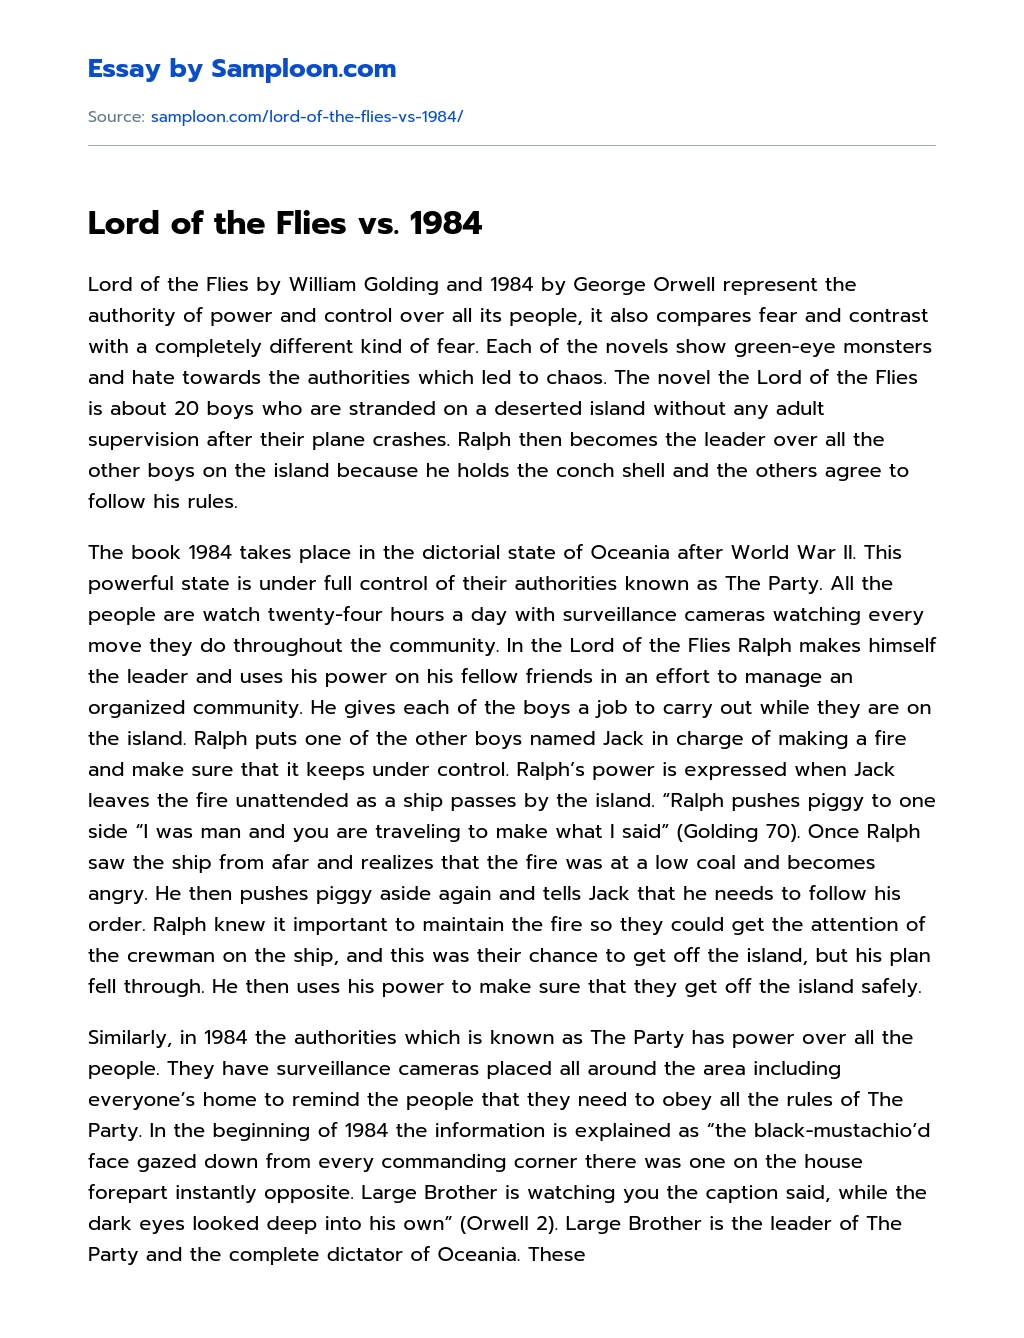 Lord of the Flies vs. 1984 Compare And Contrast essay